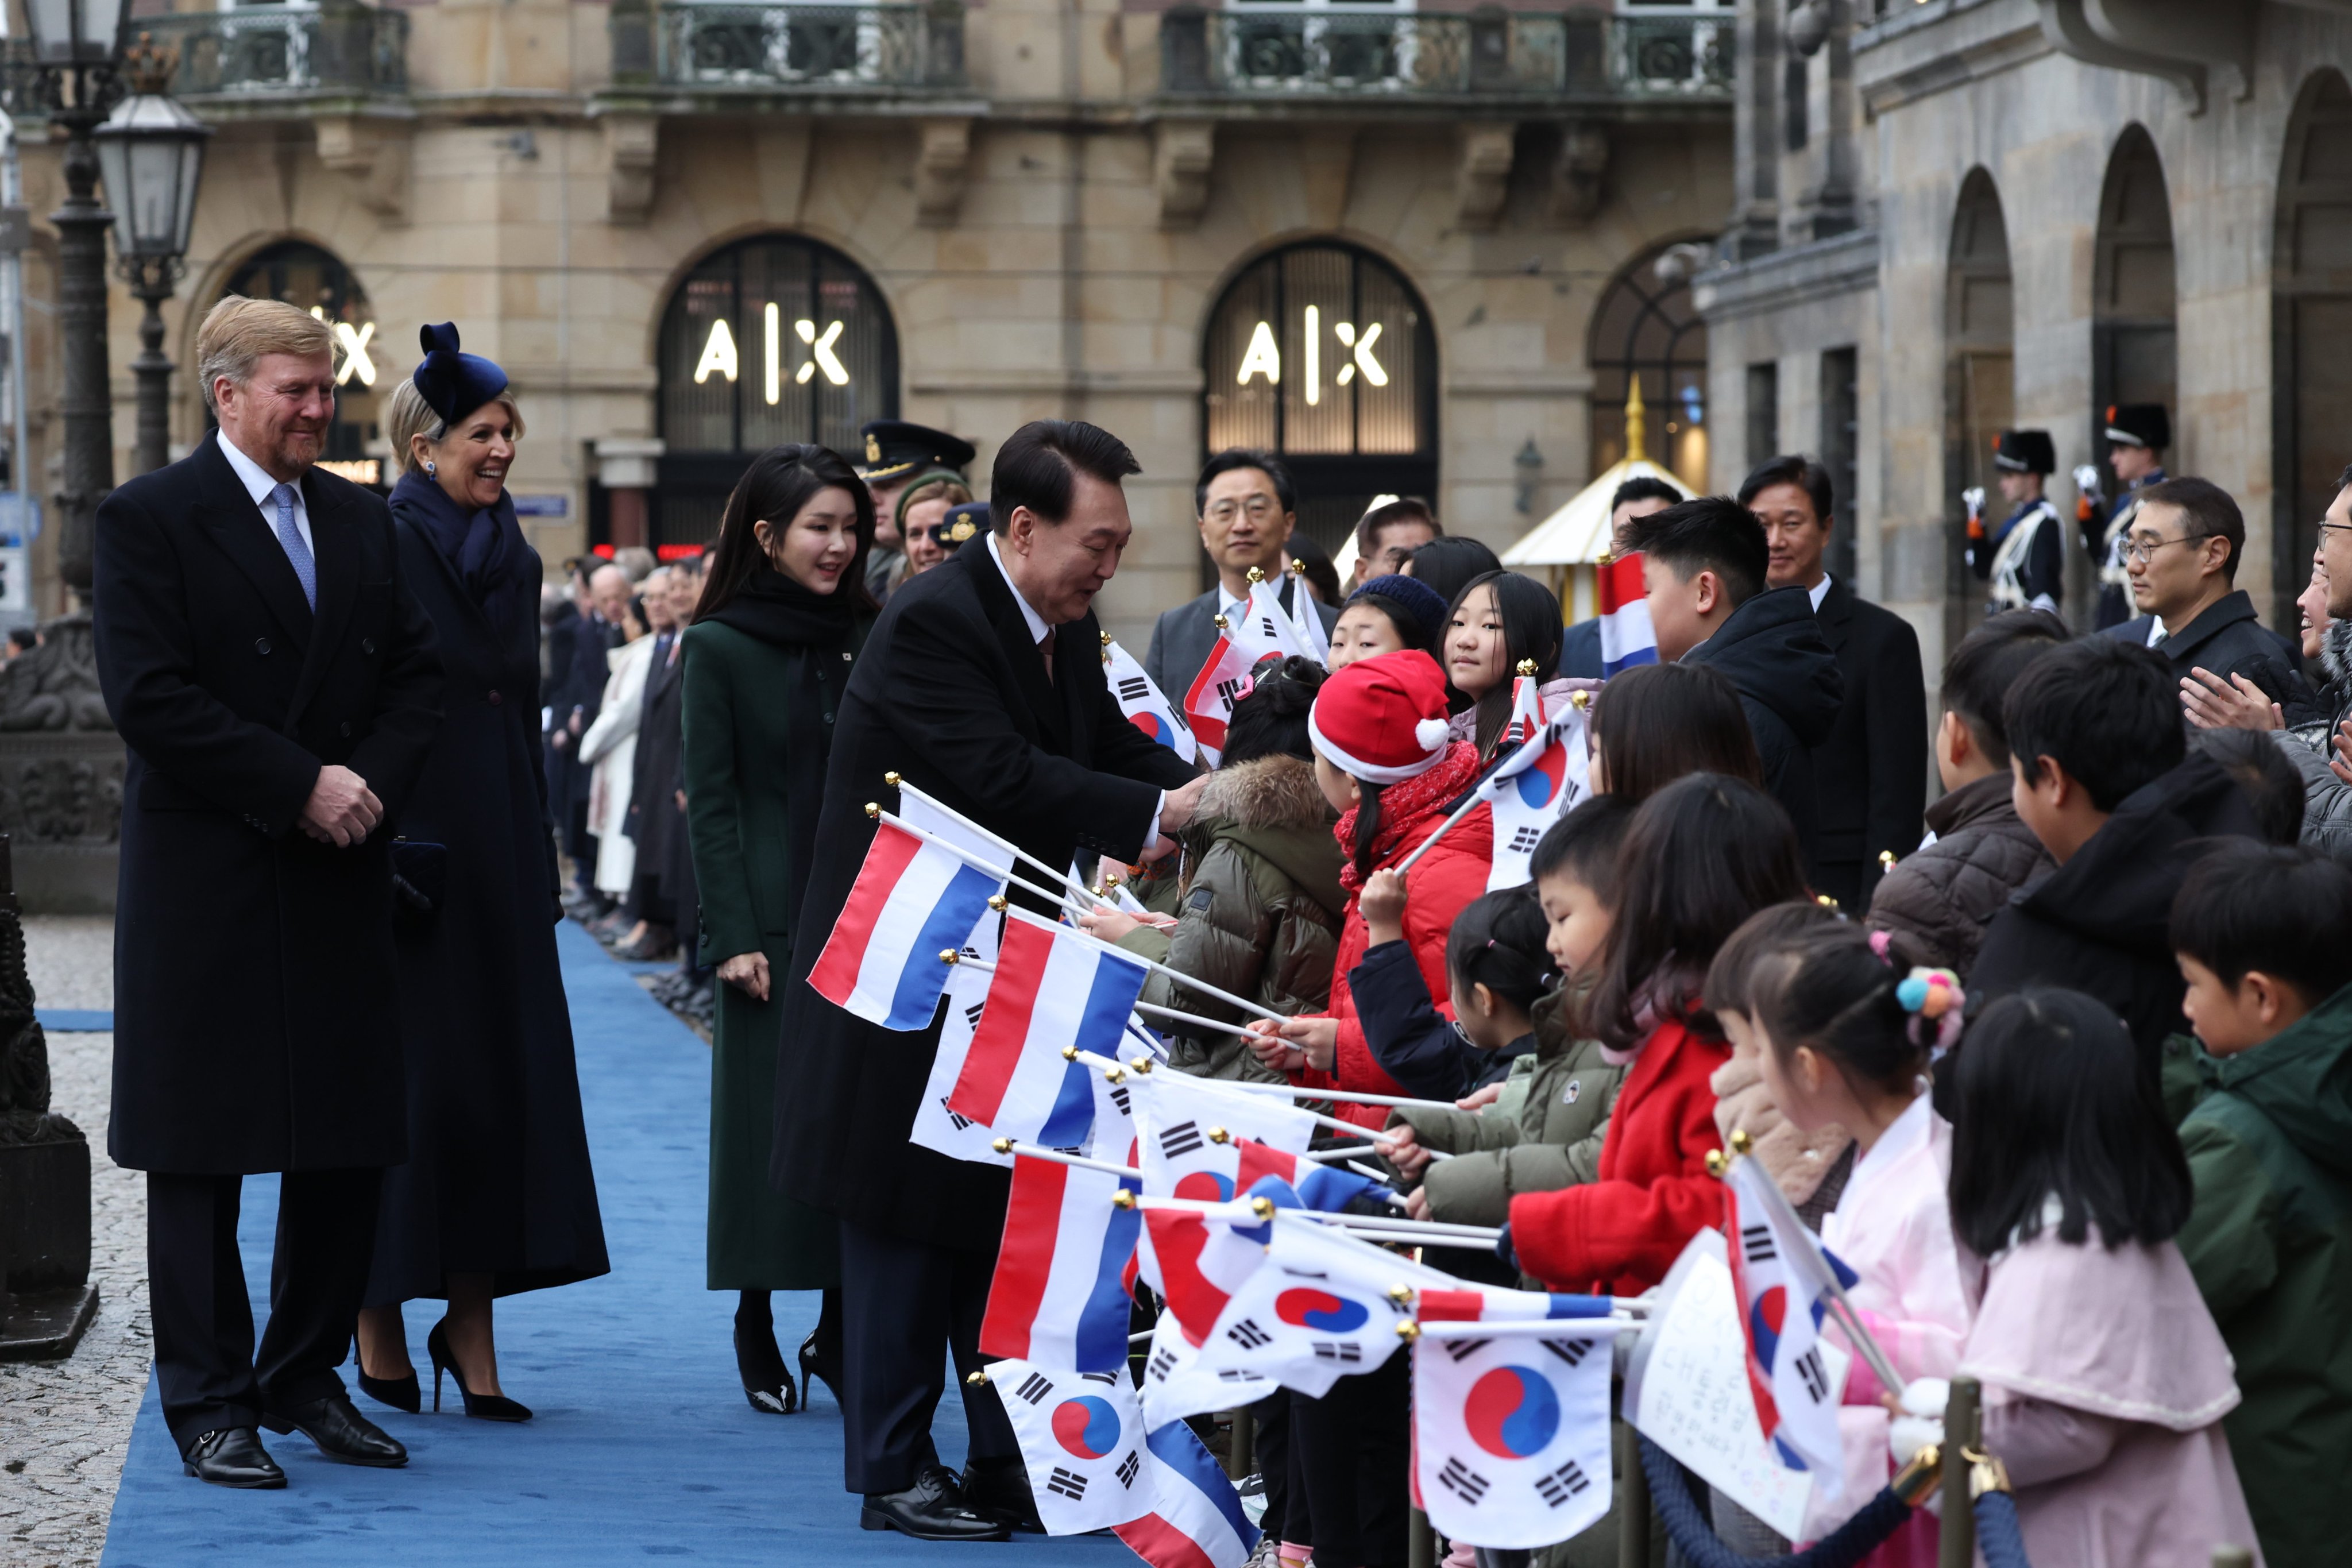 South Korean President Yoon Suk-yeol and his wife Kim Keon-hee met a group of South Korean children during a welcome ceremony on Dam Square in Amsterdam on Tuesday. Photo: EPA-EFE